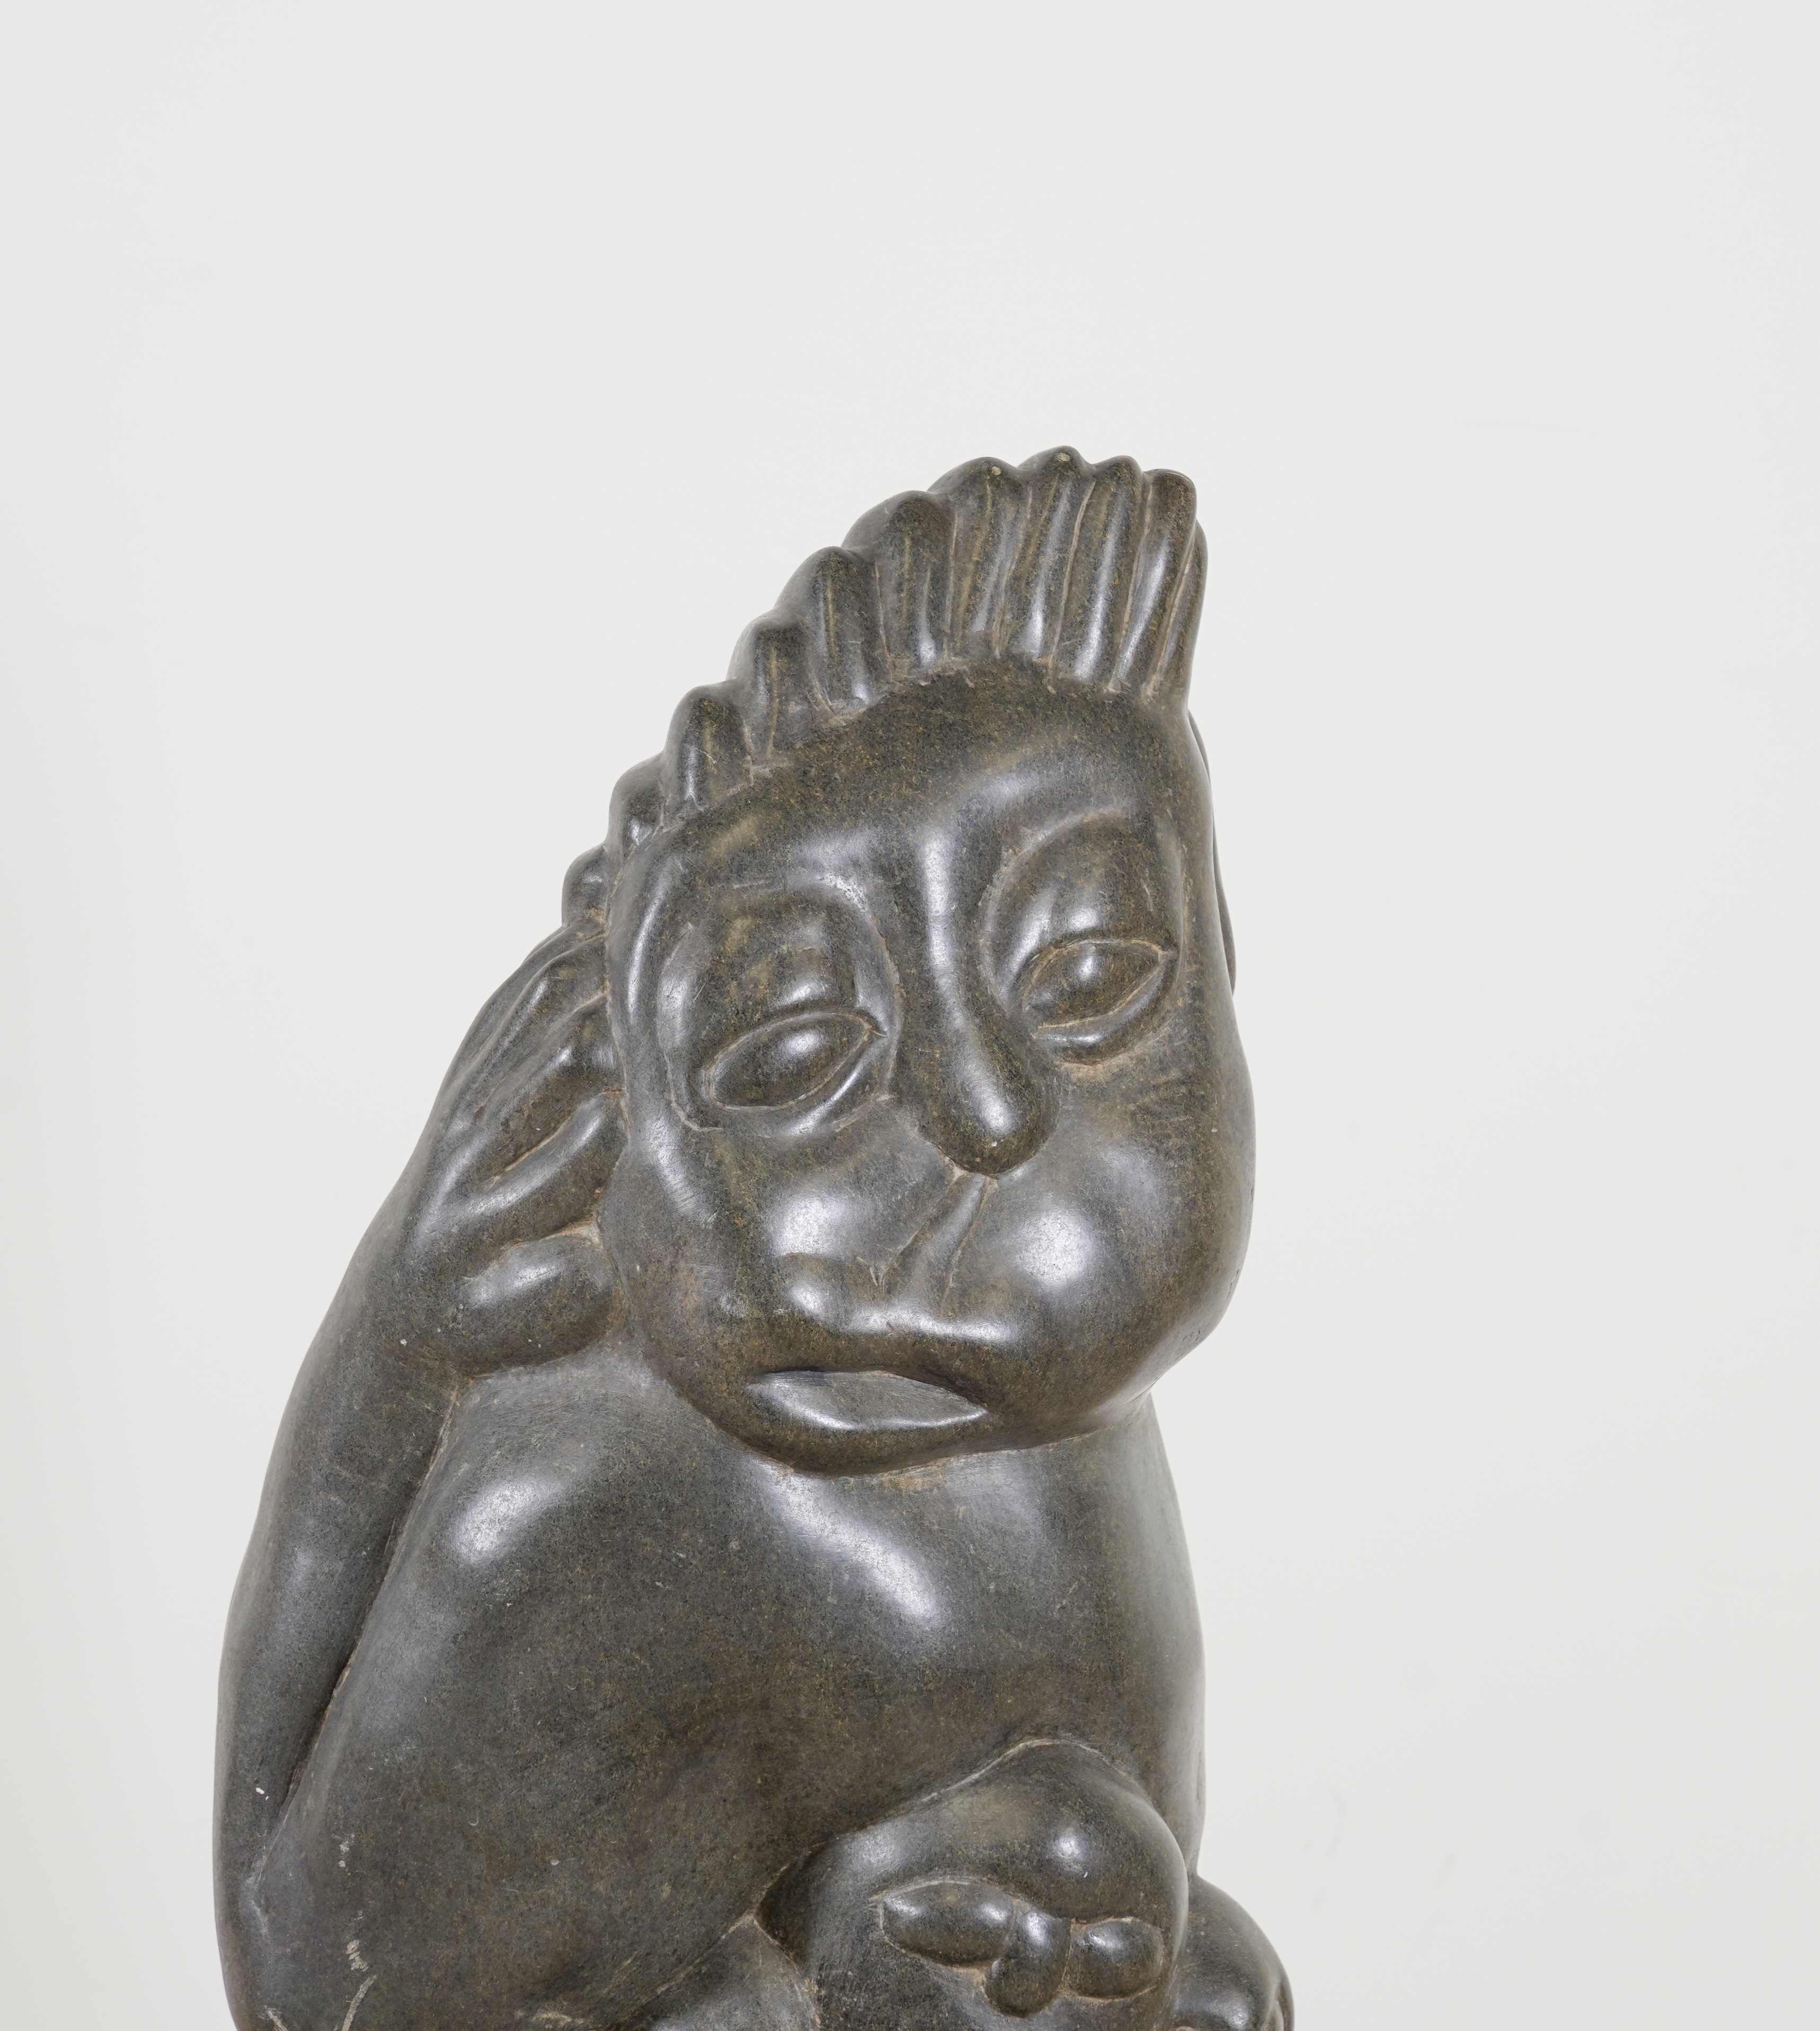 THOMAS MU (ZIMBABWE): A GREEN SERPENTINE STONE SHONA SCULPTURE OF A MOTHER AND CHILD WITH ANIMALS - Image 13 of 13